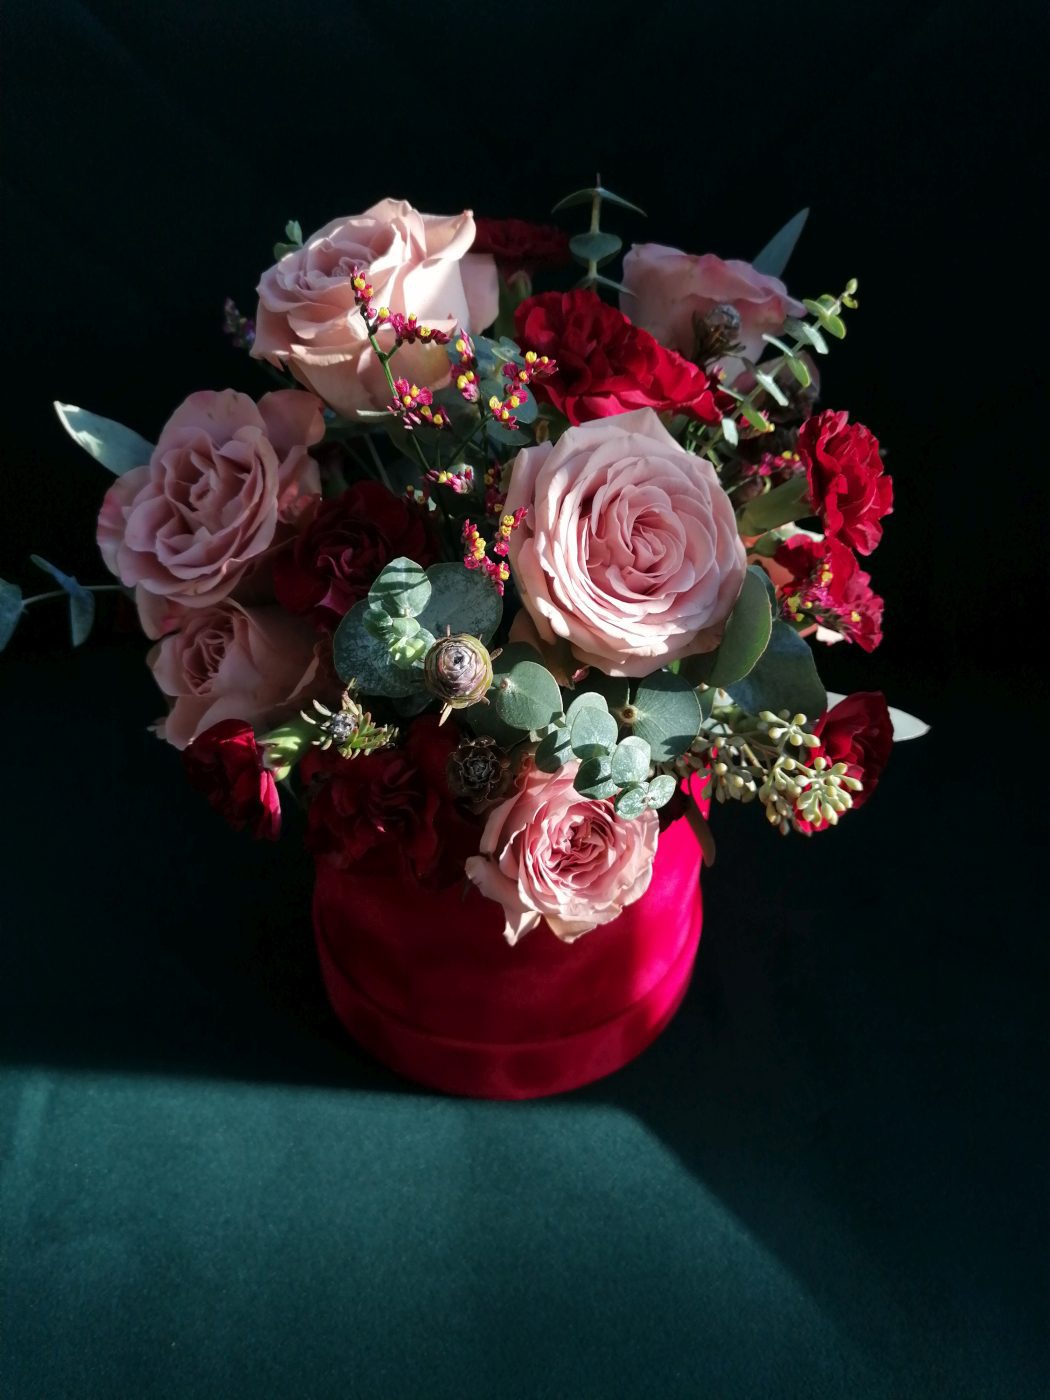 The soft shade of beige roses contrasts with the red of the carnations and the box